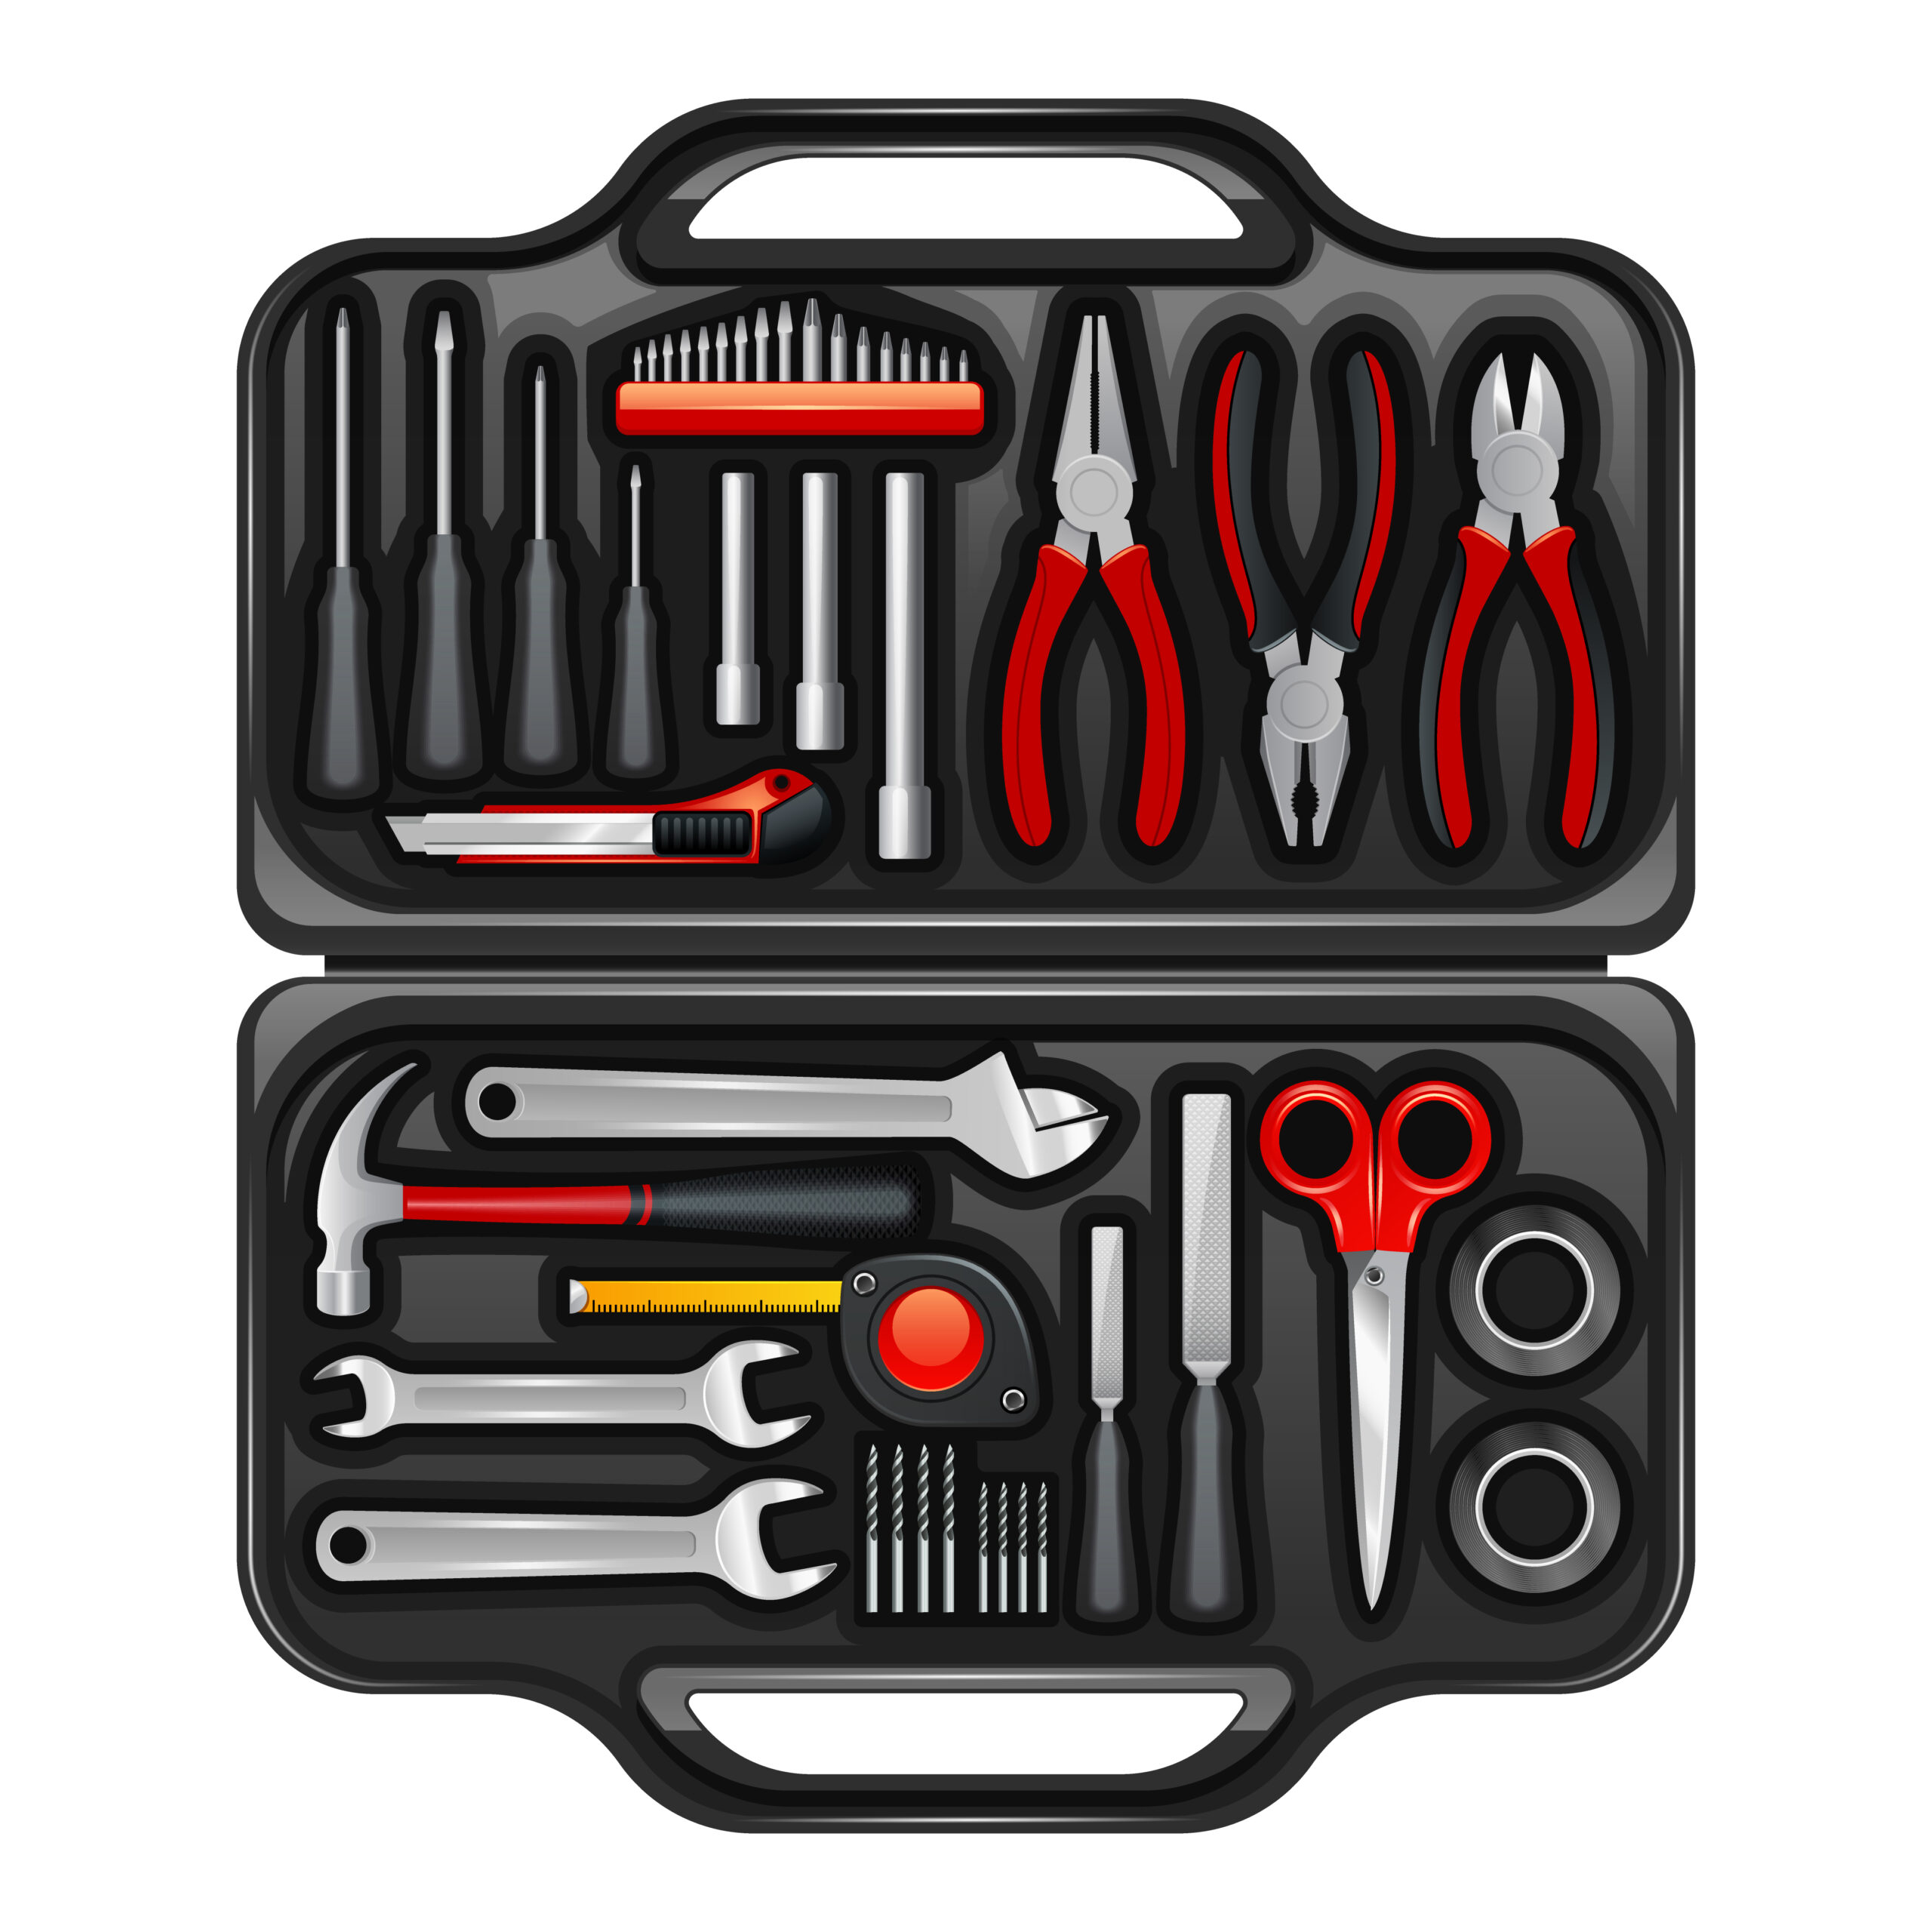 Essential car tools, Basic car maintenance toolkit, Must-have tools for new car owners, DIY car repairs for beginners, Tire maintenance essentials, Engine maintenance tools, Electrical system basics, Car emergency kit, New car owner essentials, Empowering car ownership with tools